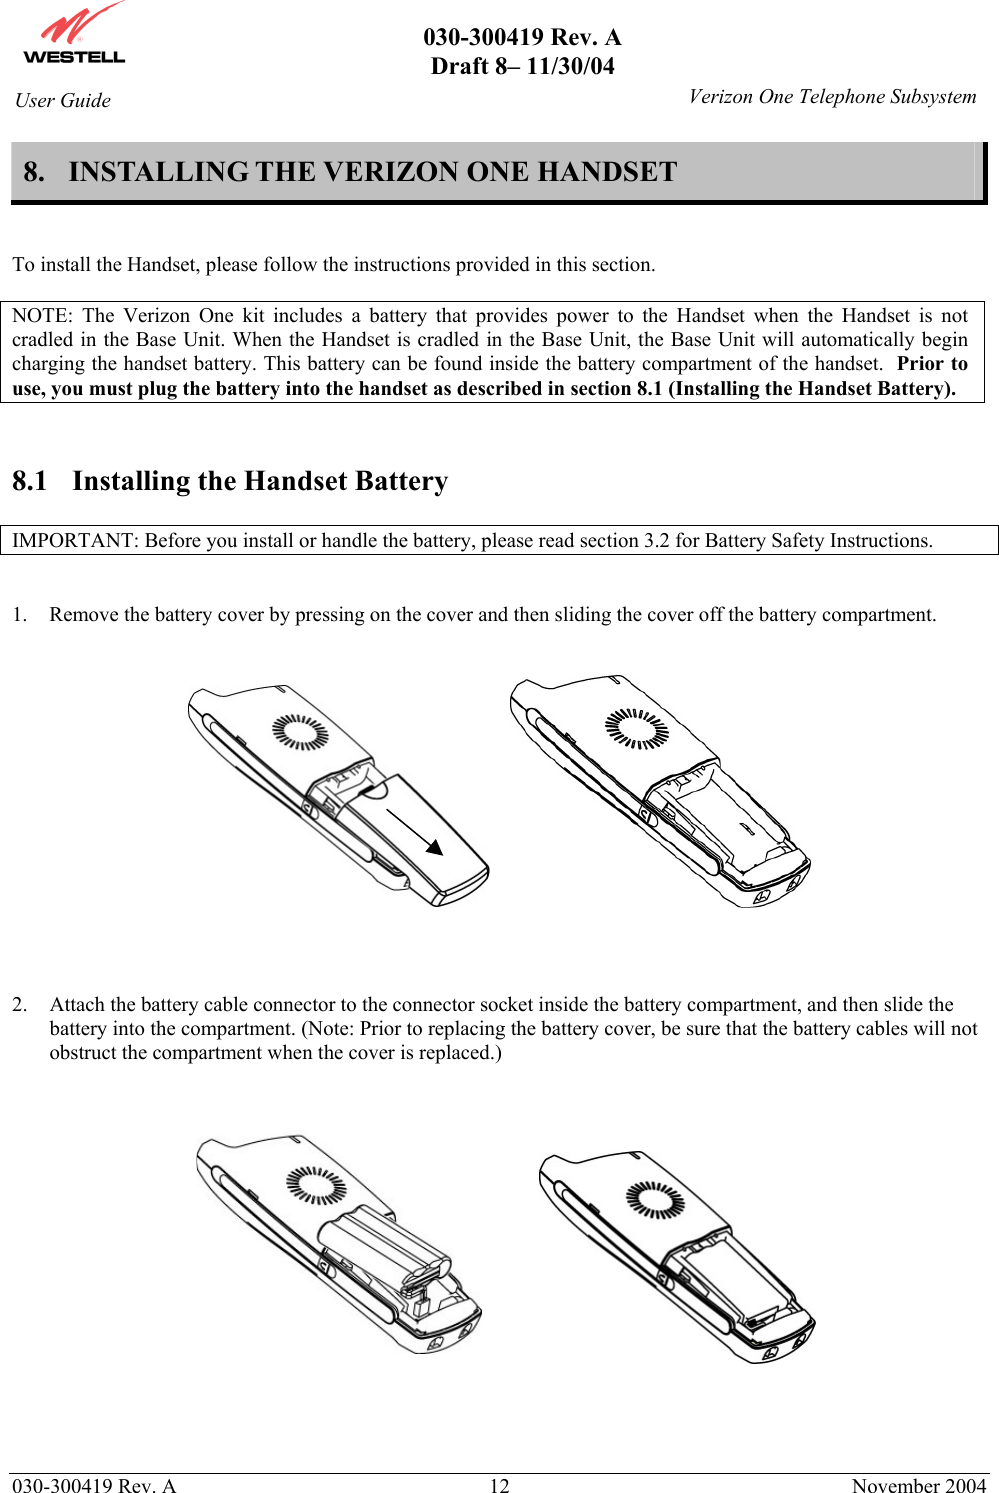       030-300419 Rev. A Draft 8– 11/30/04    030-300419 Rev. A  12  November 2004 User Guide   Verizon One Telephone Subsystem8.  INSTALLING THE VERIZON ONE HANDSET   To install the Handset, please follow the instructions provided in this section.   NOTE: The Verizon One kit includes a battery that provides power to the Handset when the Handset is not cradled in the Base Unit. When the Handset is cradled in the Base Unit, the Base Unit will automatically begin charging the handset battery. This battery can be found inside the battery compartment of the handset.  Prior to use, you must plug the battery into the handset as described in section 8.1 (Installing the Handset Battery).   8.1  Installing the Handset Battery  IMPORTANT: Before you install or handle the battery, please read section 3.2 for Battery Safety Instructions.   1.  Remove the battery cover by pressing on the cover and then sliding the cover off the battery compartment.          2.  Attach the battery cable connector to the connector socket inside the battery compartment, and then slide the battery into the compartment. (Note: Prior to replacing the battery cover, be sure that the battery cables will not obstruct the compartment when the cover is replaced.)          